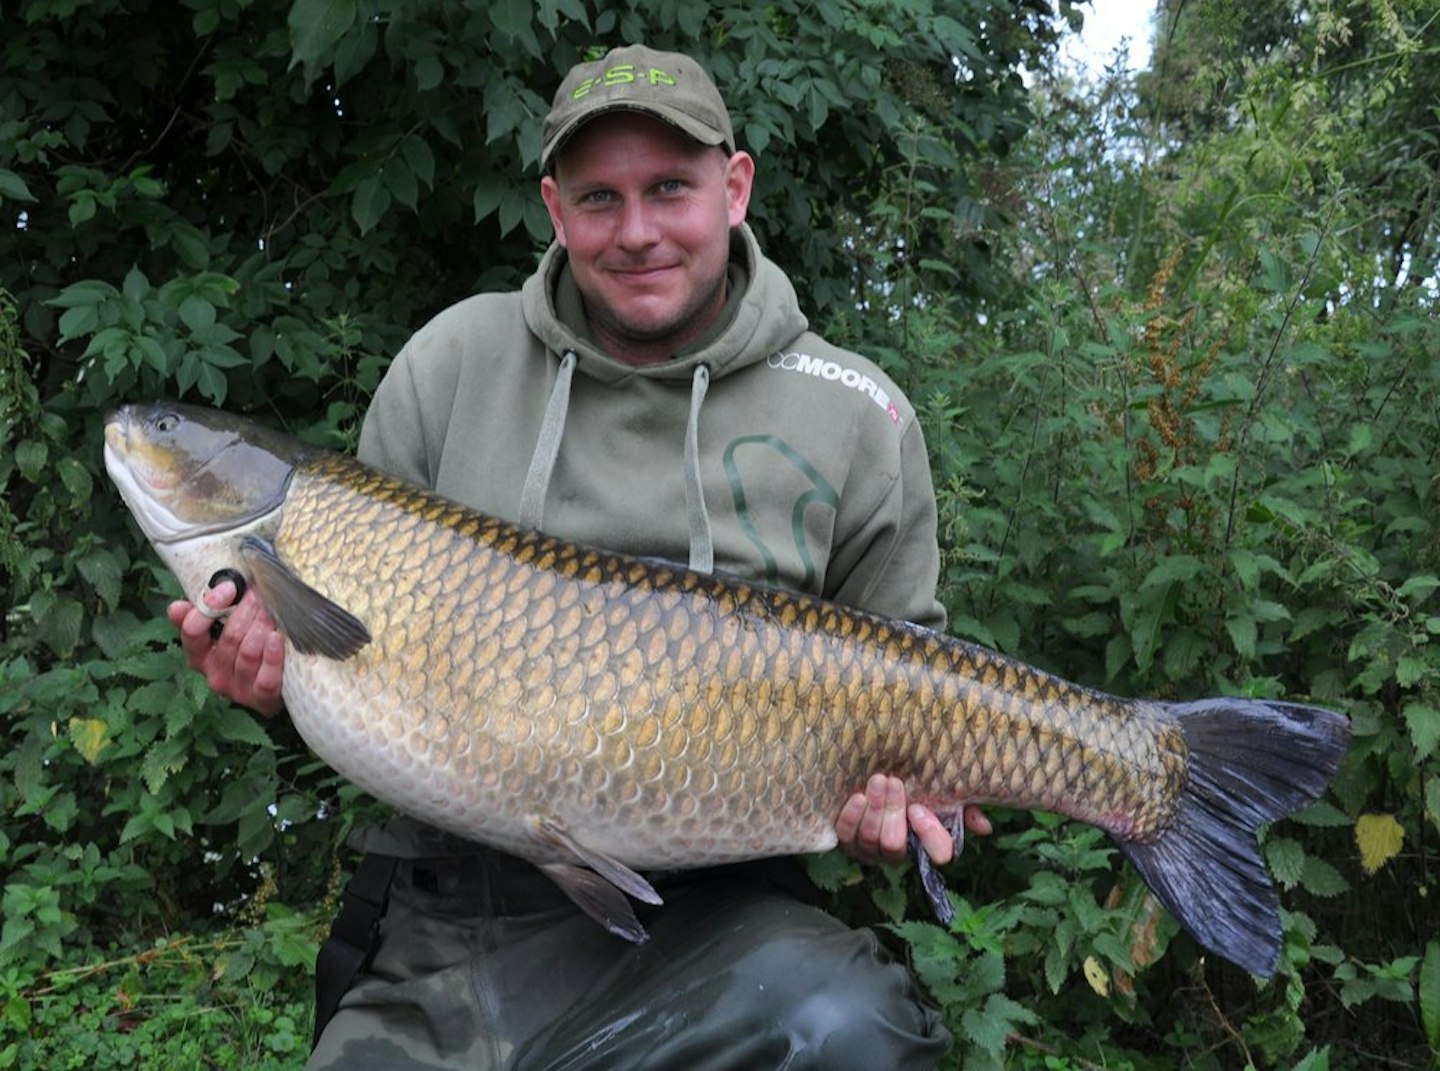 Kev Hewitt with a mid-forty grass carp